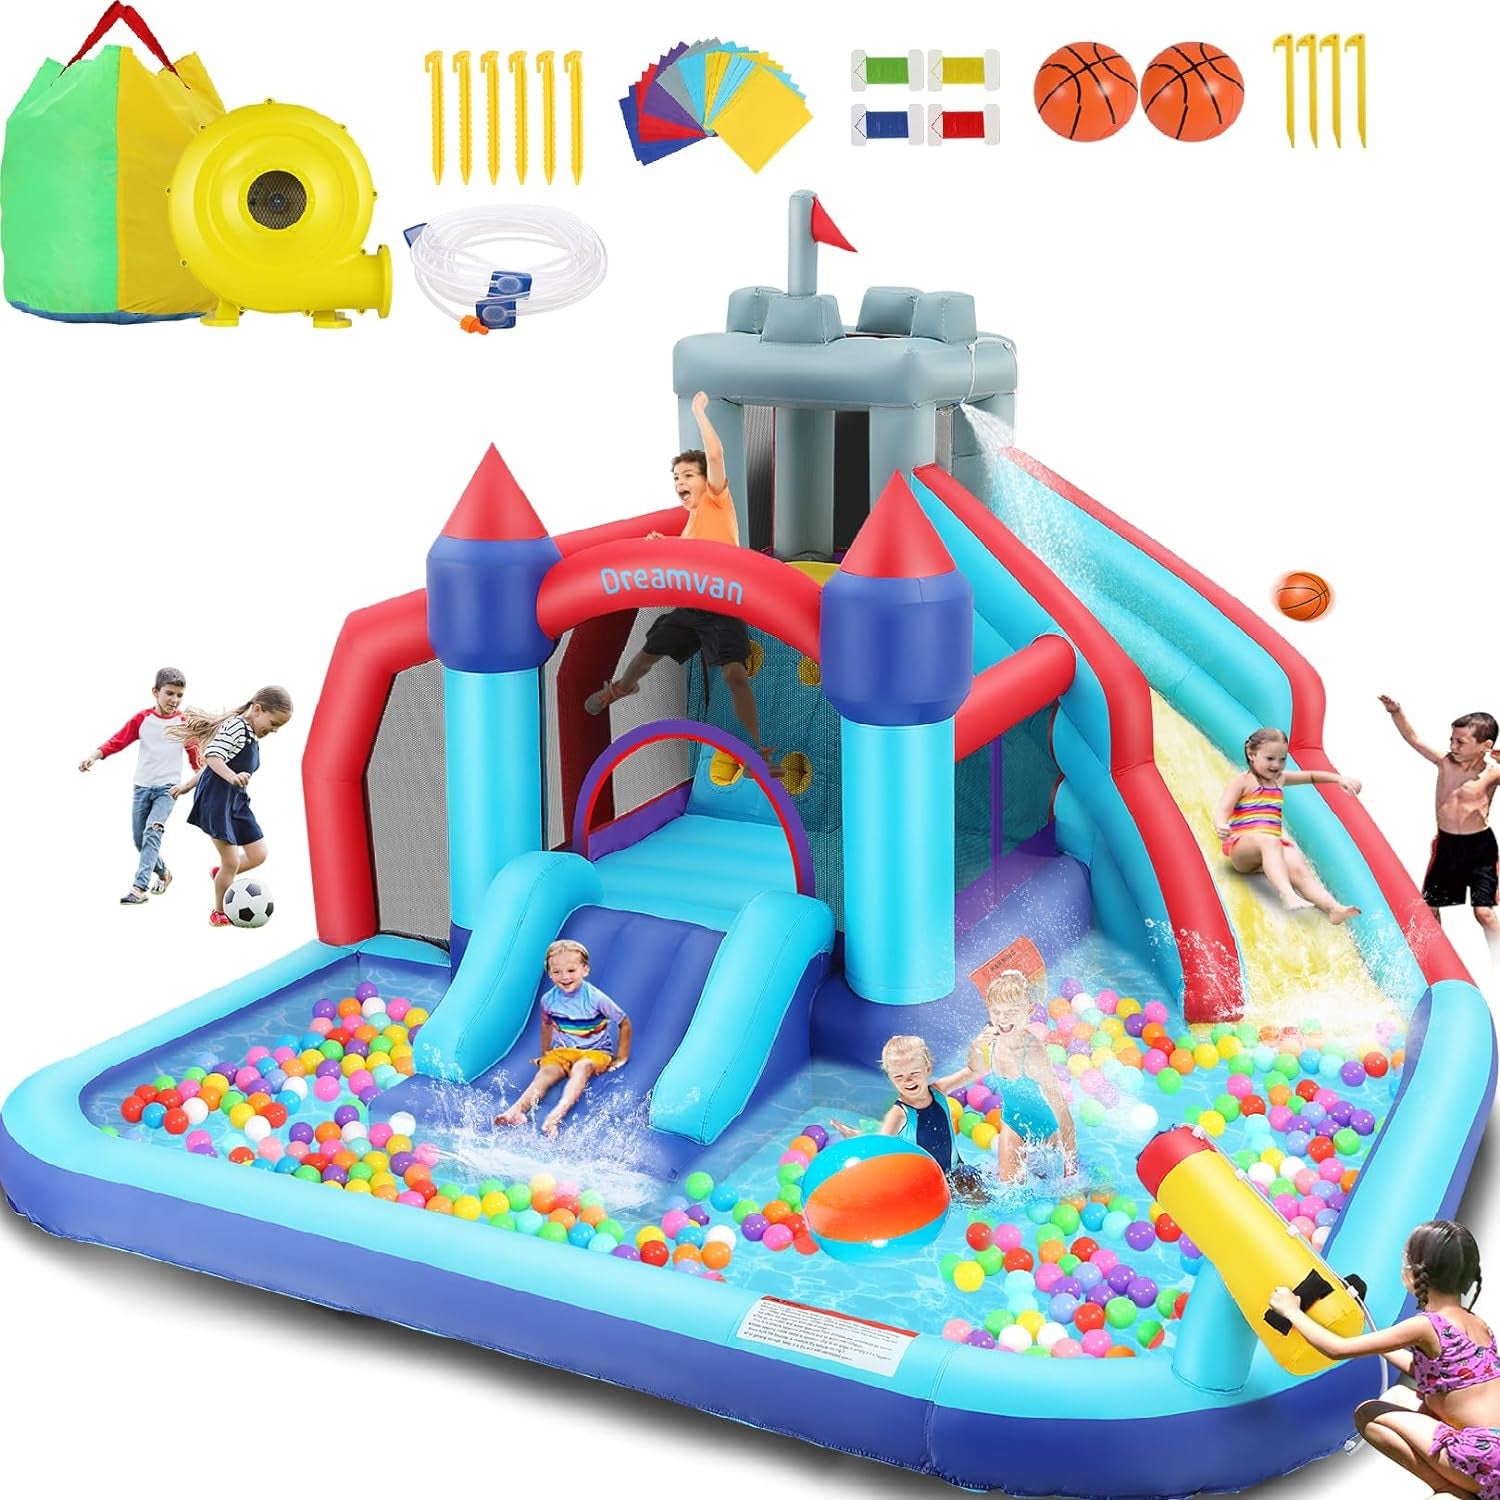 Inflatable Water Slide, 6 in 1 Outdoor Inflatable Water Park with Climbing, Basketball Rim, Splash Pool, Water Cannon, Blow up Water Slides for Kids Backyard